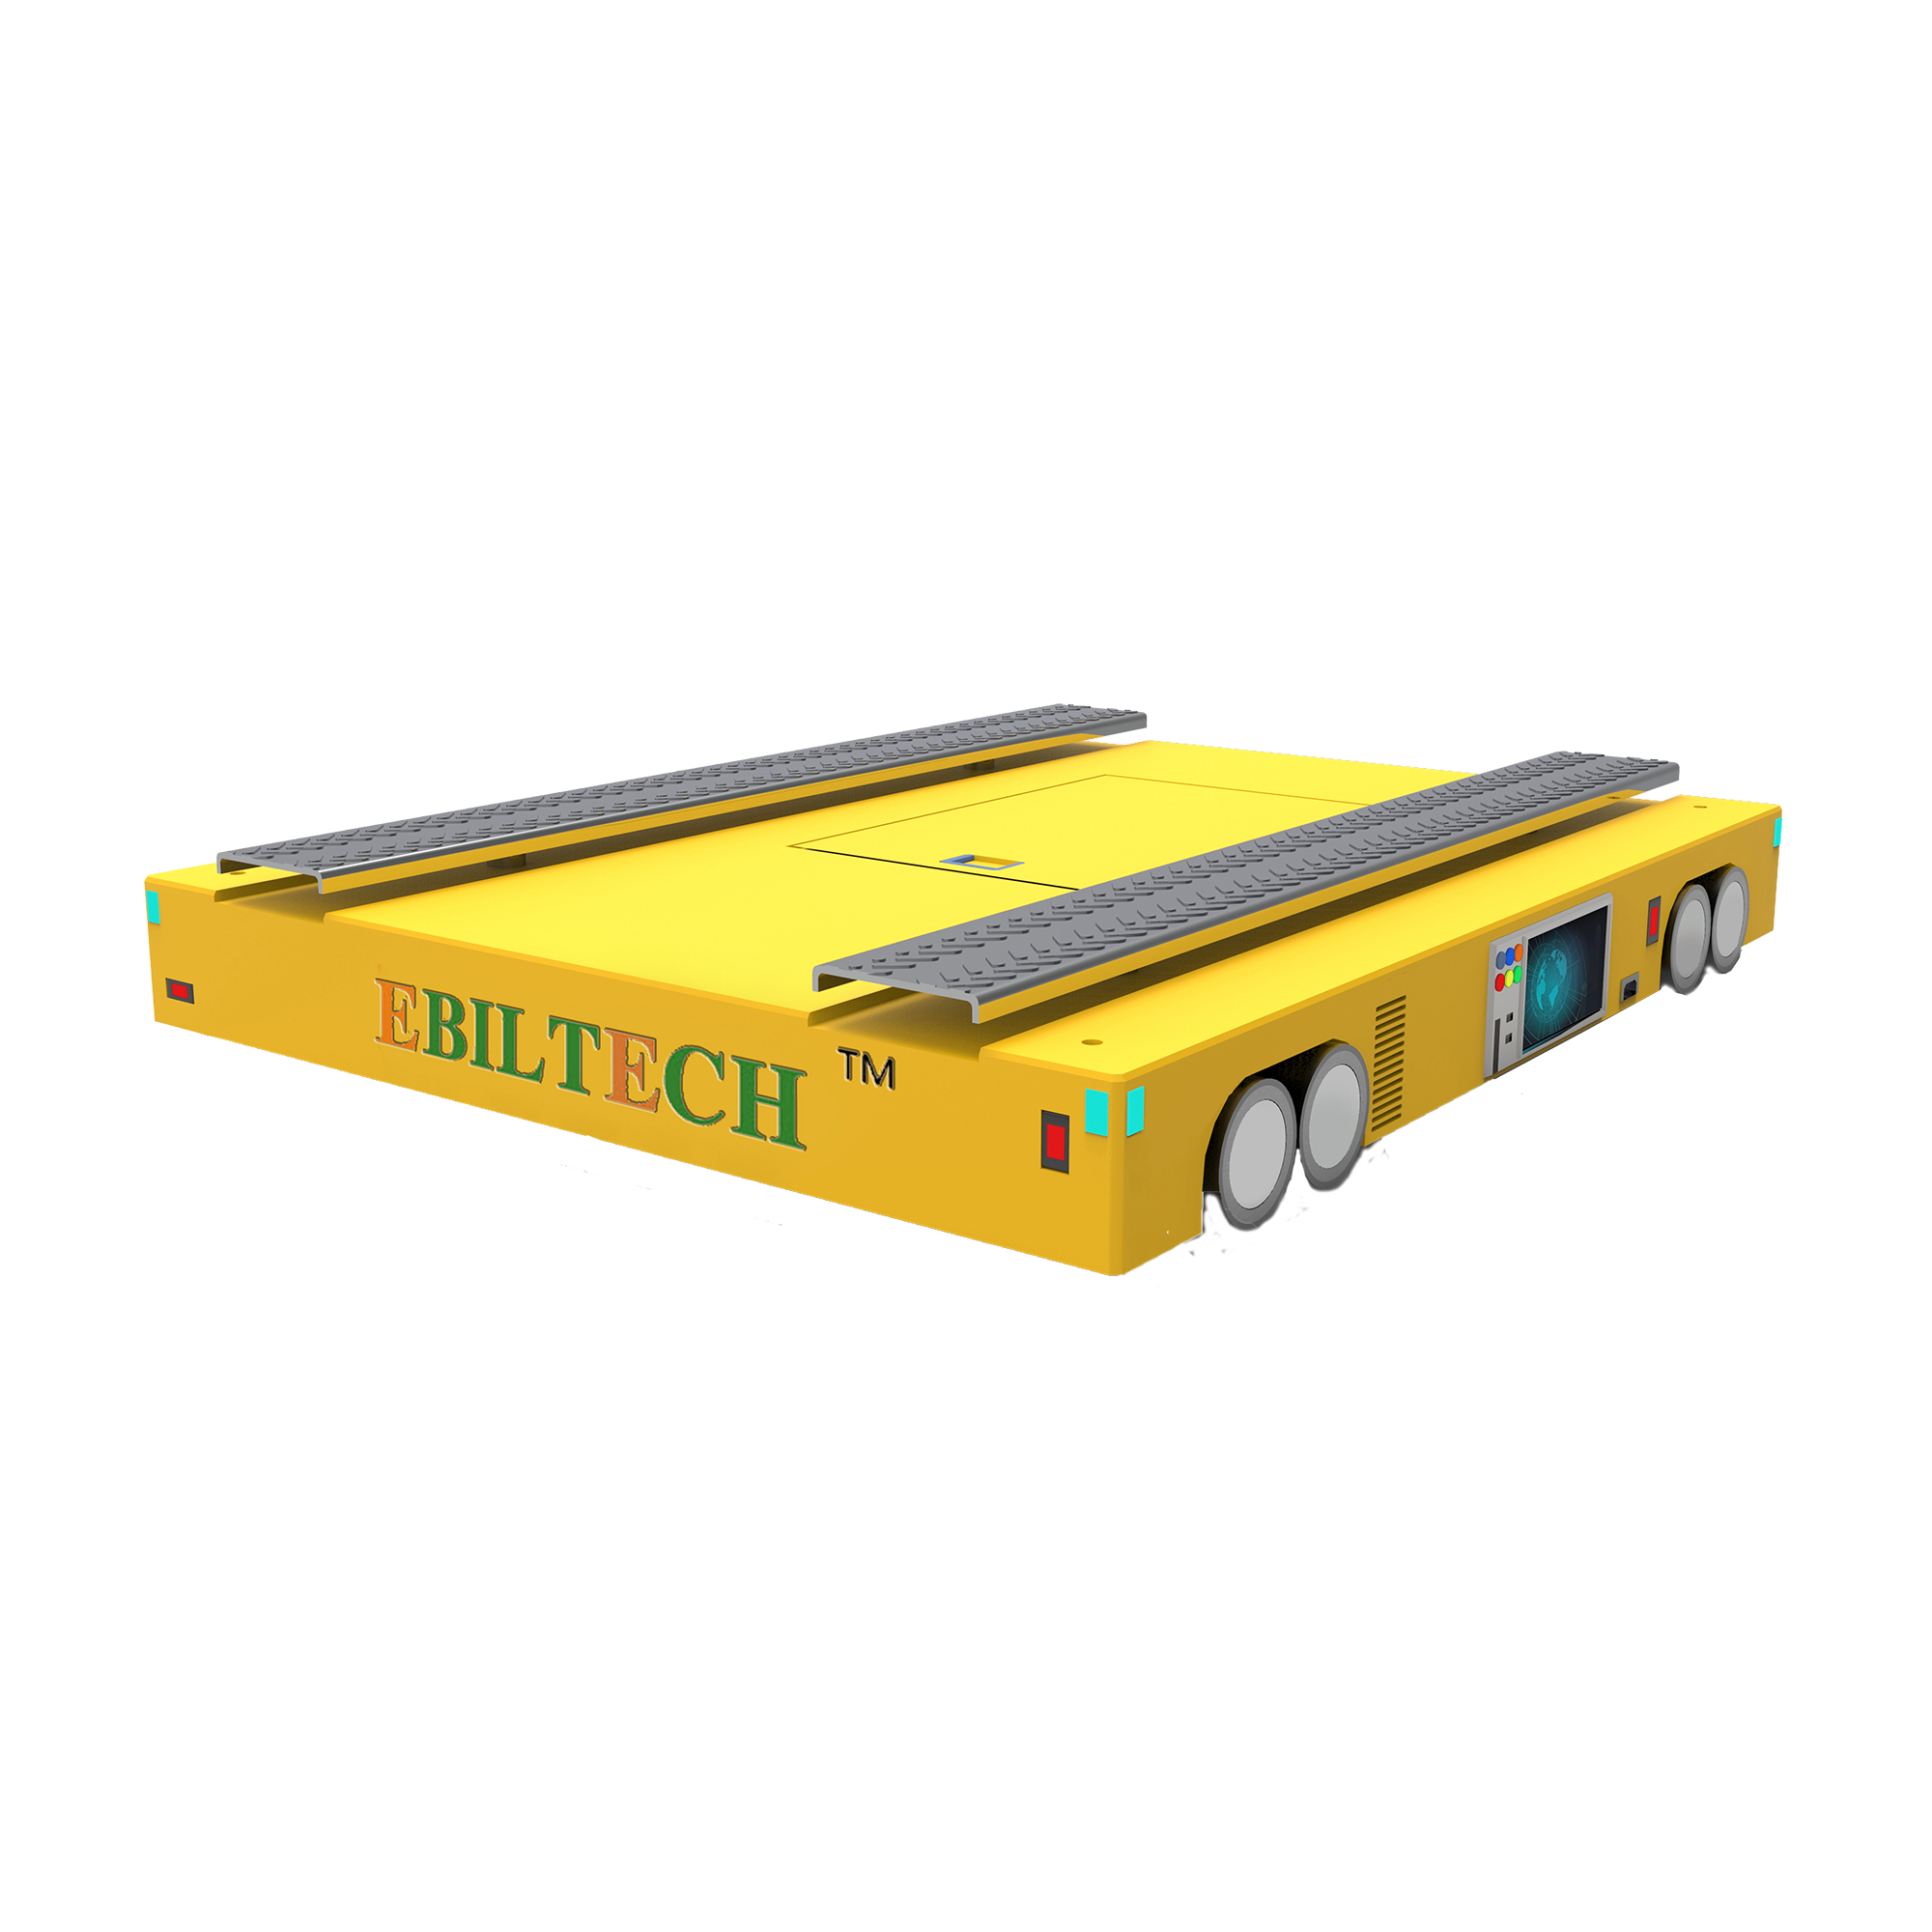 Smart Storage Equipment Four-Way Pallet Shuttle Cart For Automated Storage & Retrieval Systems